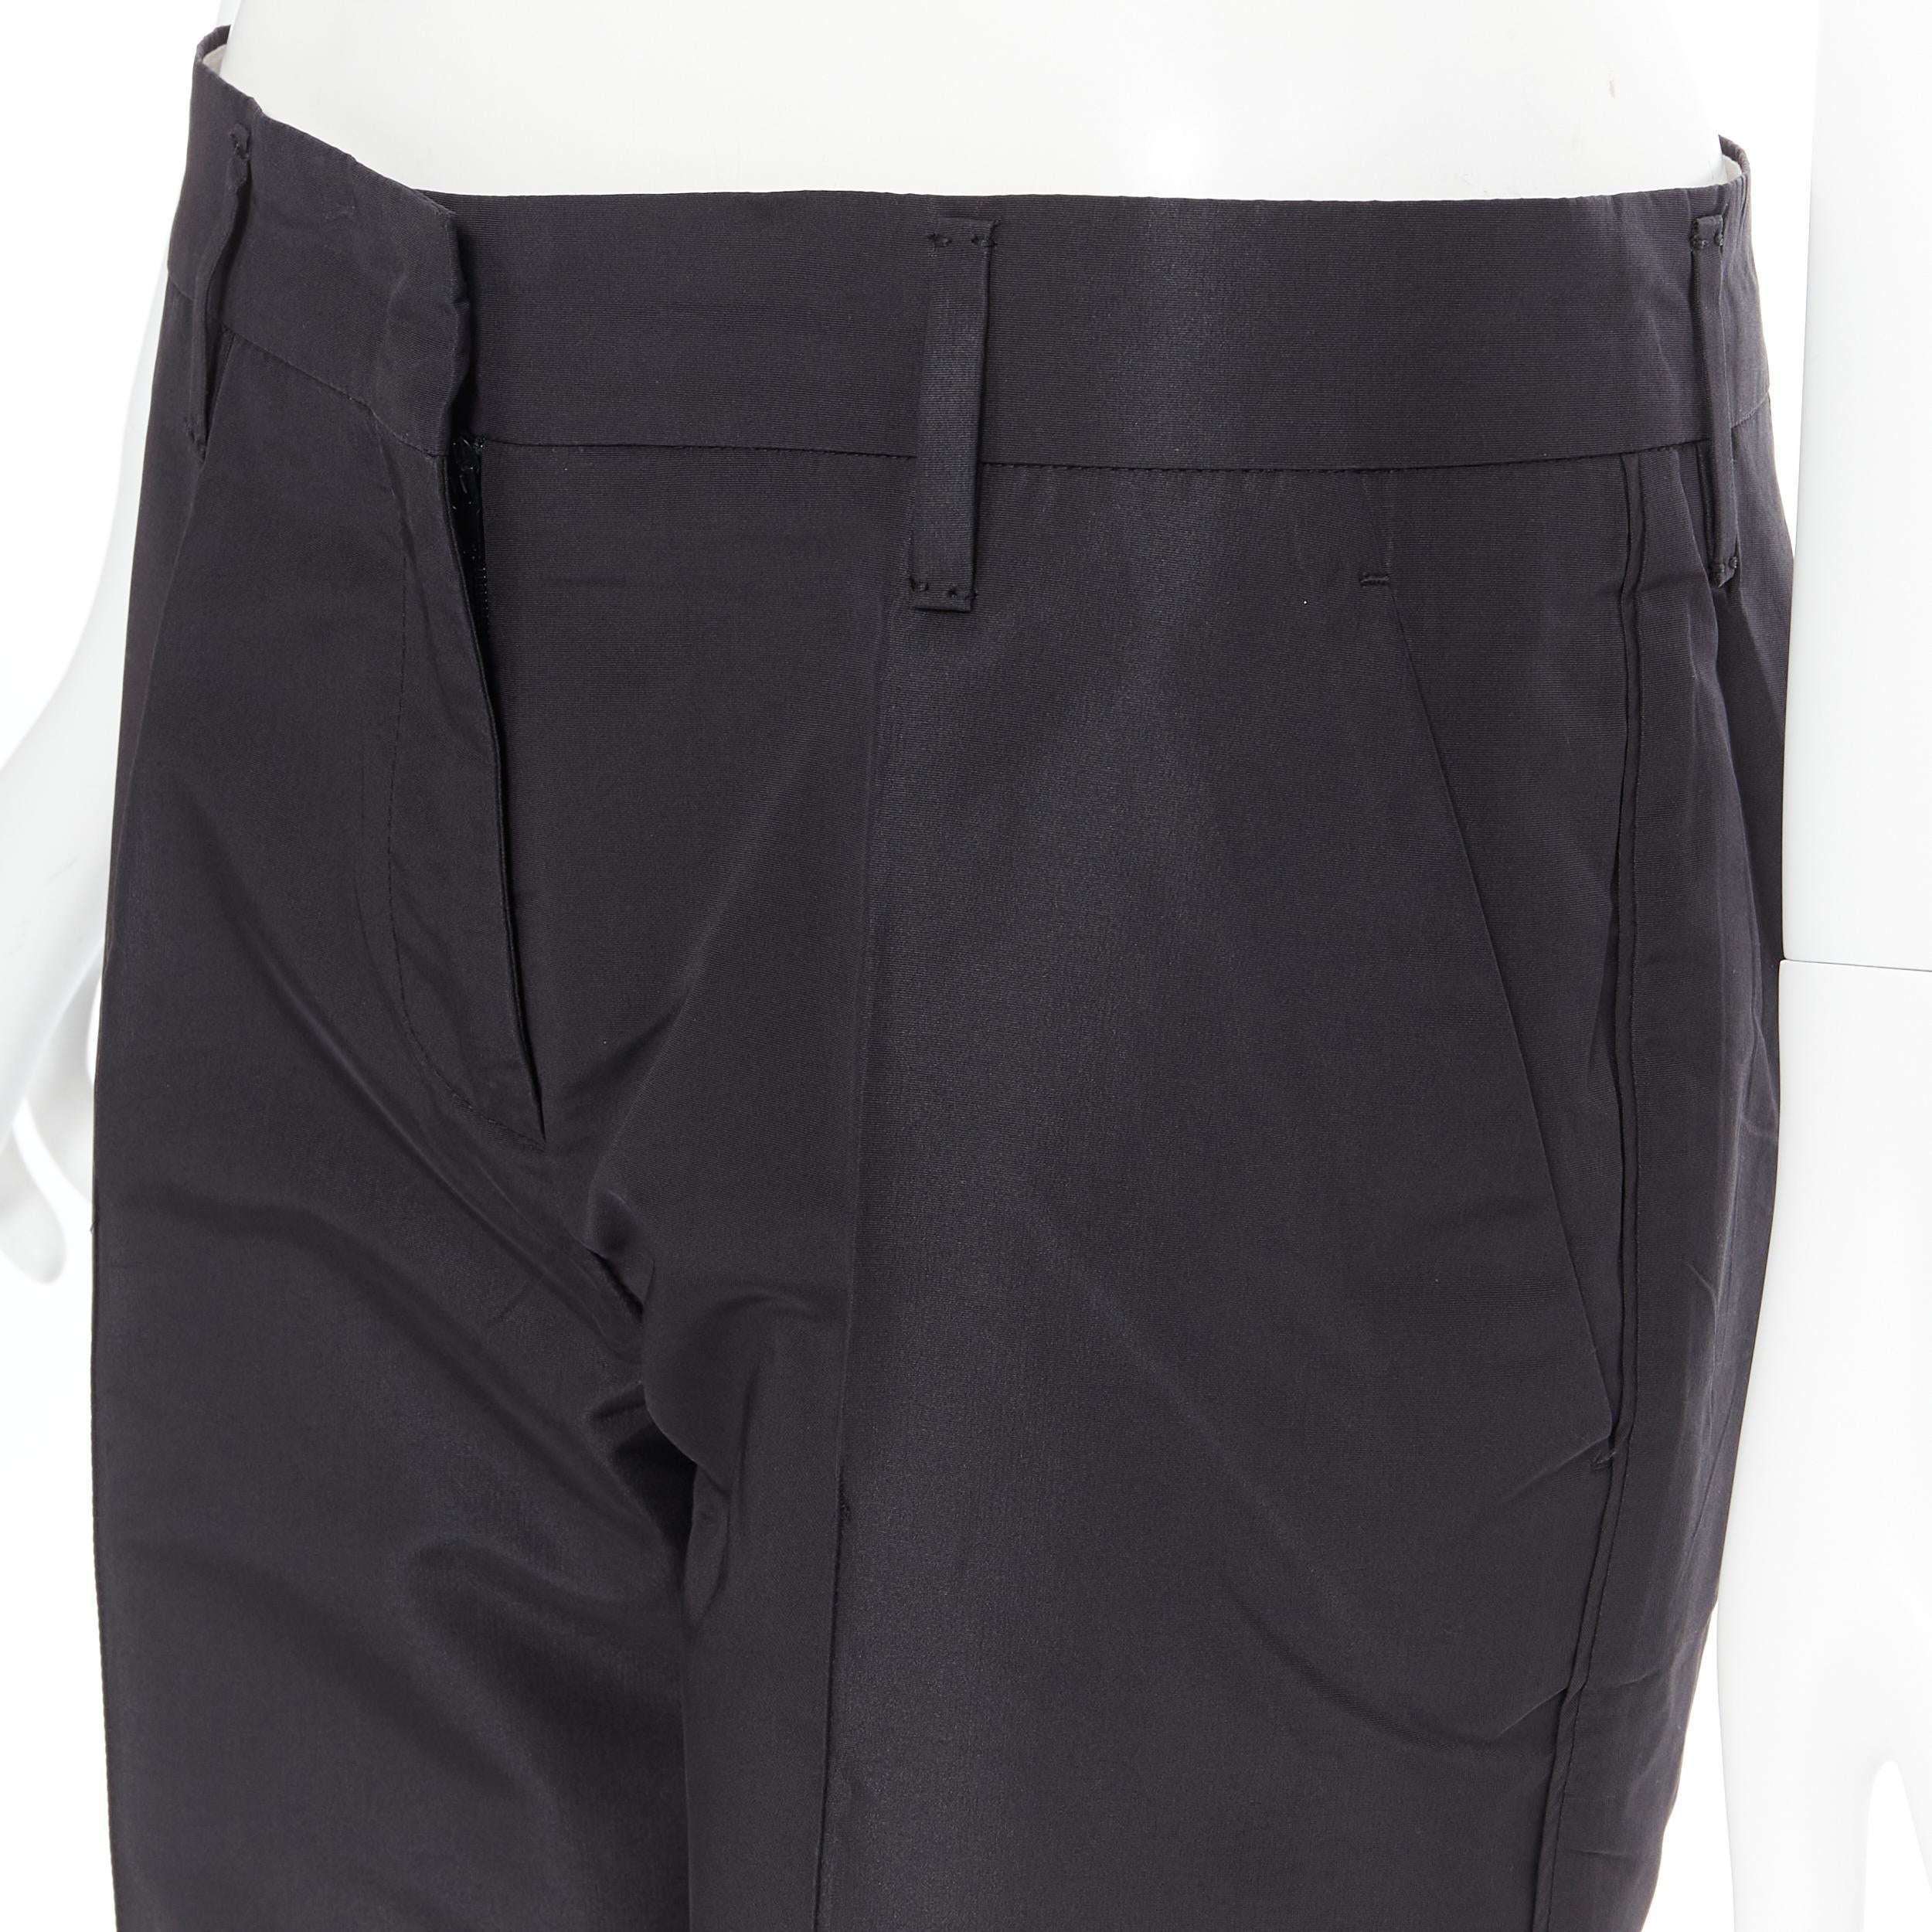 PRADA 2009 black silk polyester pleat front 4-pocket trousers pants IT40 
Reference: PYCN/A00065 
Brand: Prada 
Designer: Miuccia Prada 
Collection: 2009 
Material: Silk 
Color: Black 
Pattern: Solid 
Closure: Zip 
Extra Detail: Hook bar zip fly.